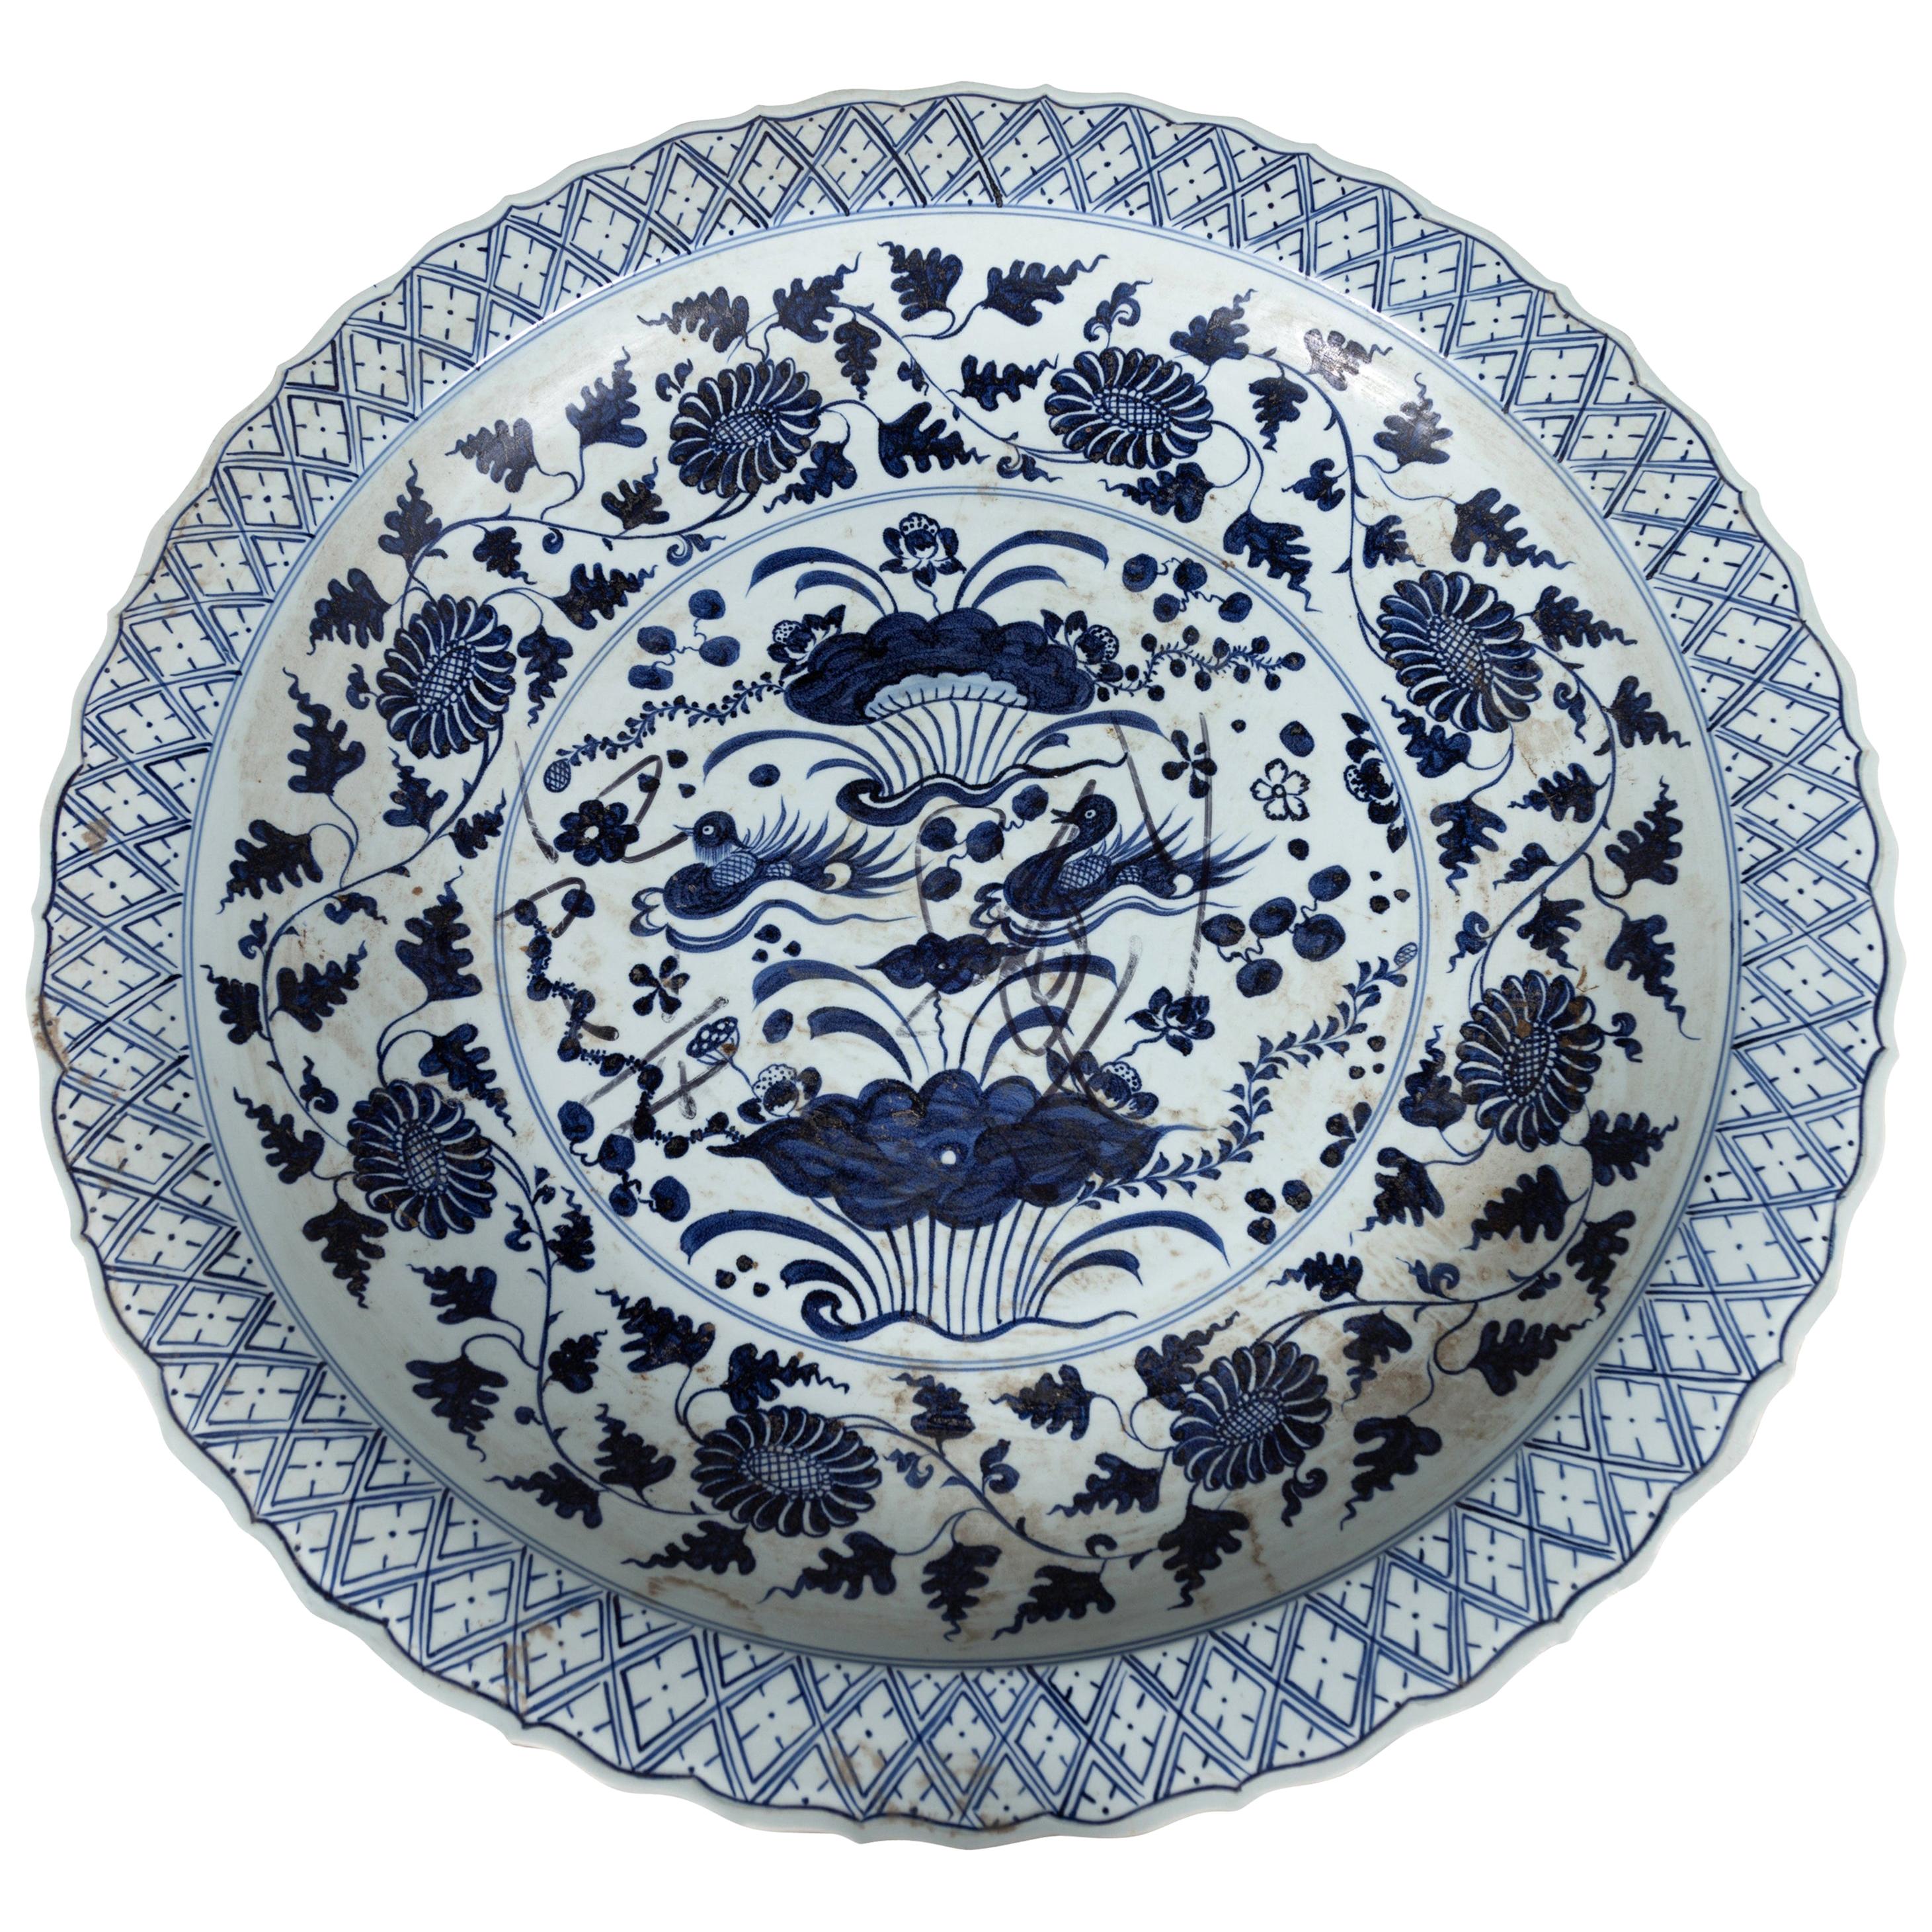 Large Chinese Vintage Blue and White Charger Plate with Flower and Bird Motifs